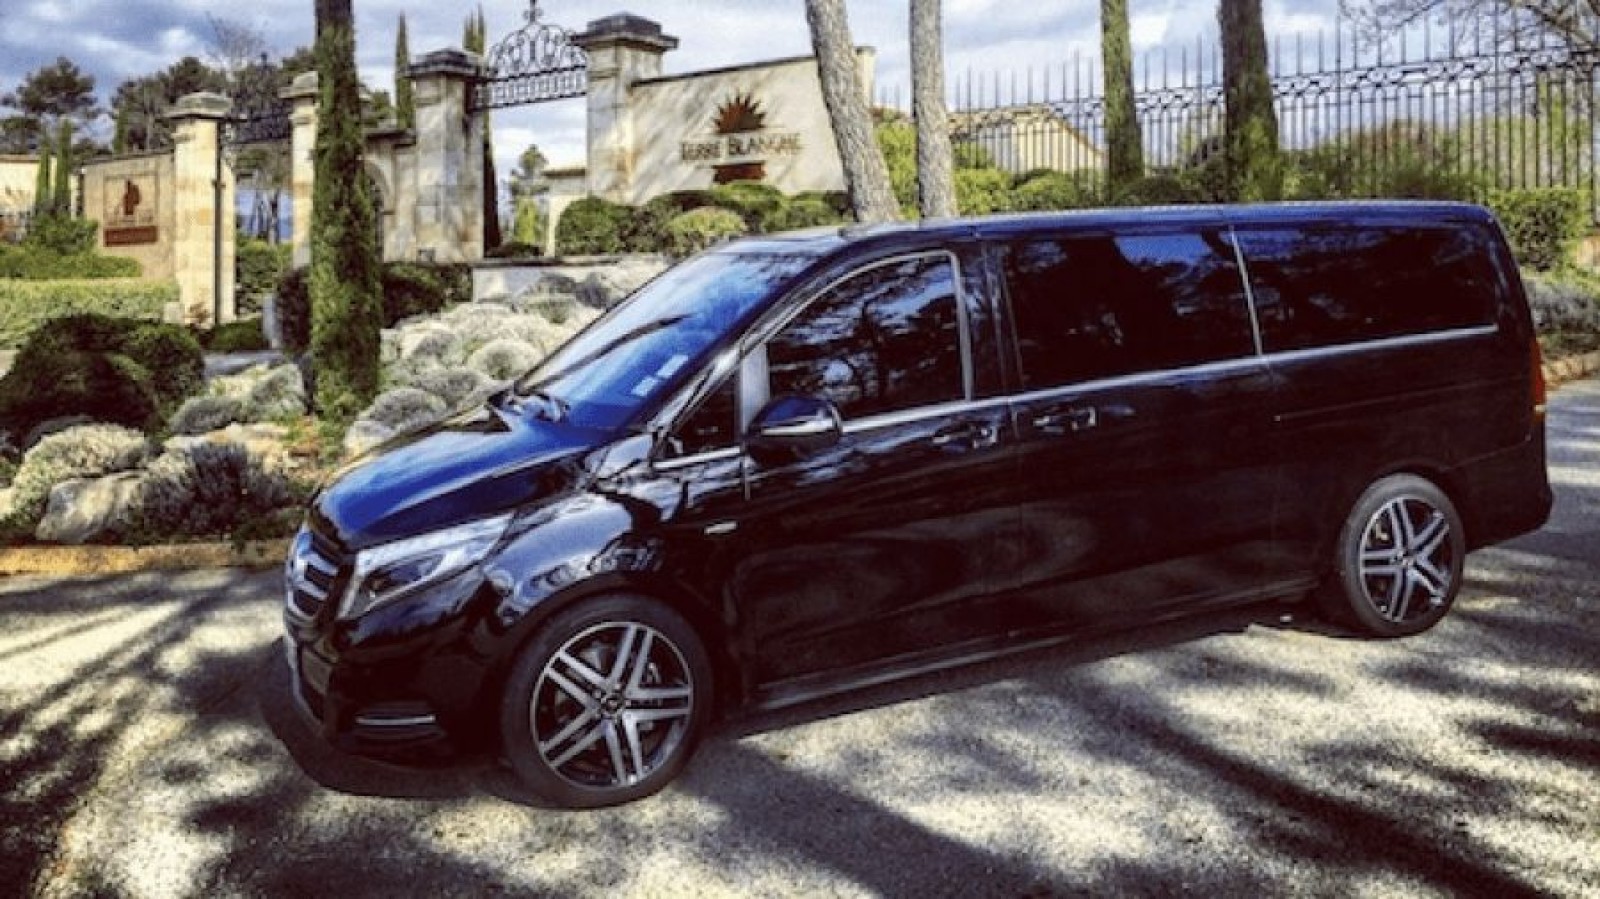 Transfer from Nice Airport to Antibes - Book your transfer 24/7 - Ruby Services - Book Your Transfer From Nice Airport to Antibes With Private Chauffeur. 